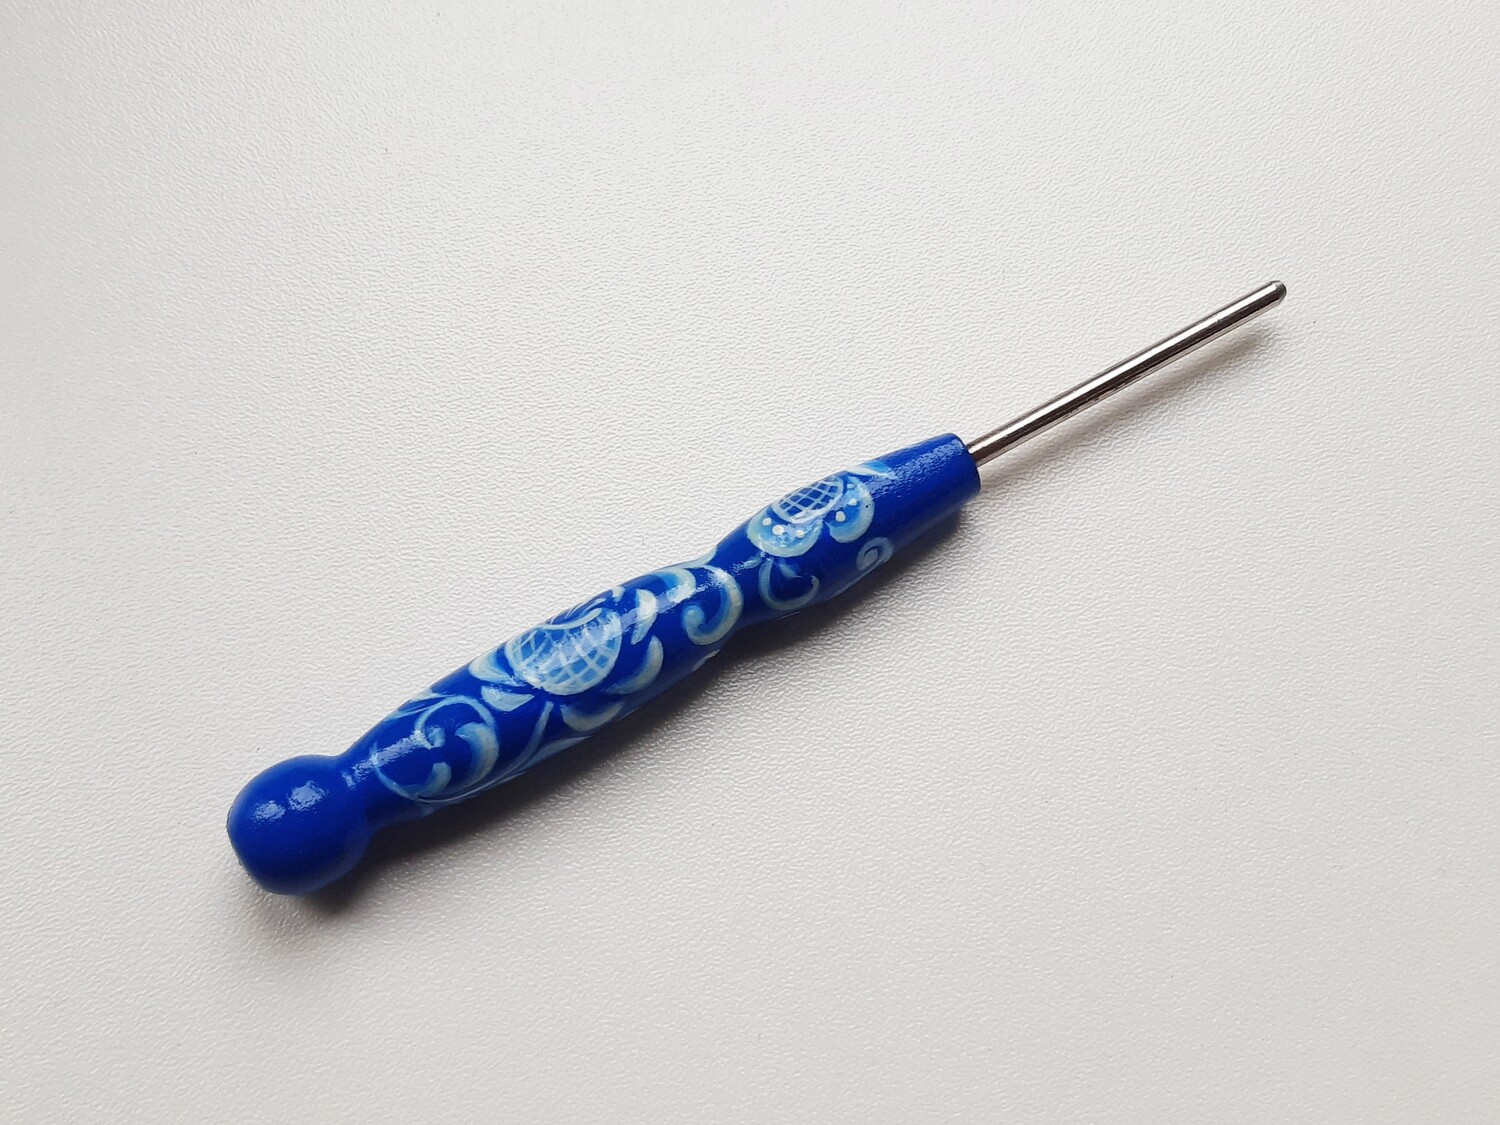 A Tool Used to Make Picots Consistent / Picot Gauge 2.6 mm Painted Gzhel on Blue